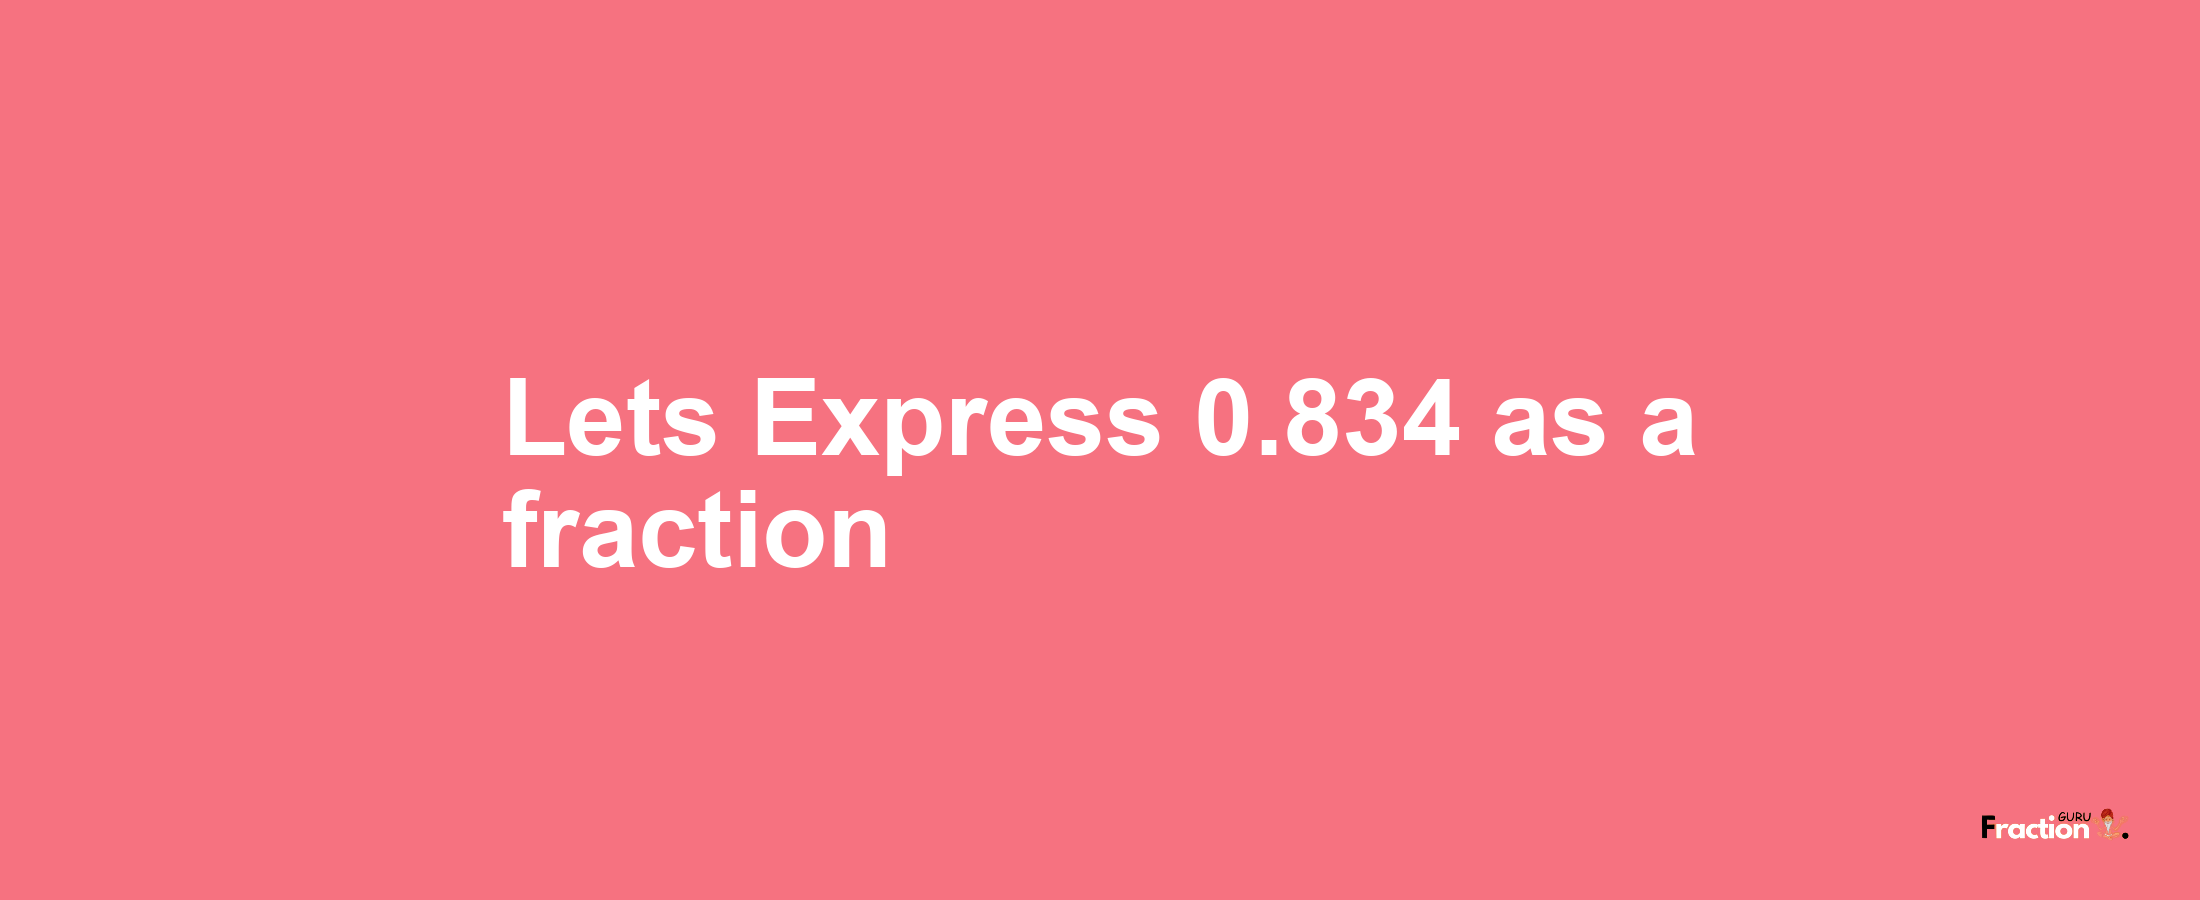 Lets Express 0.834 as afraction